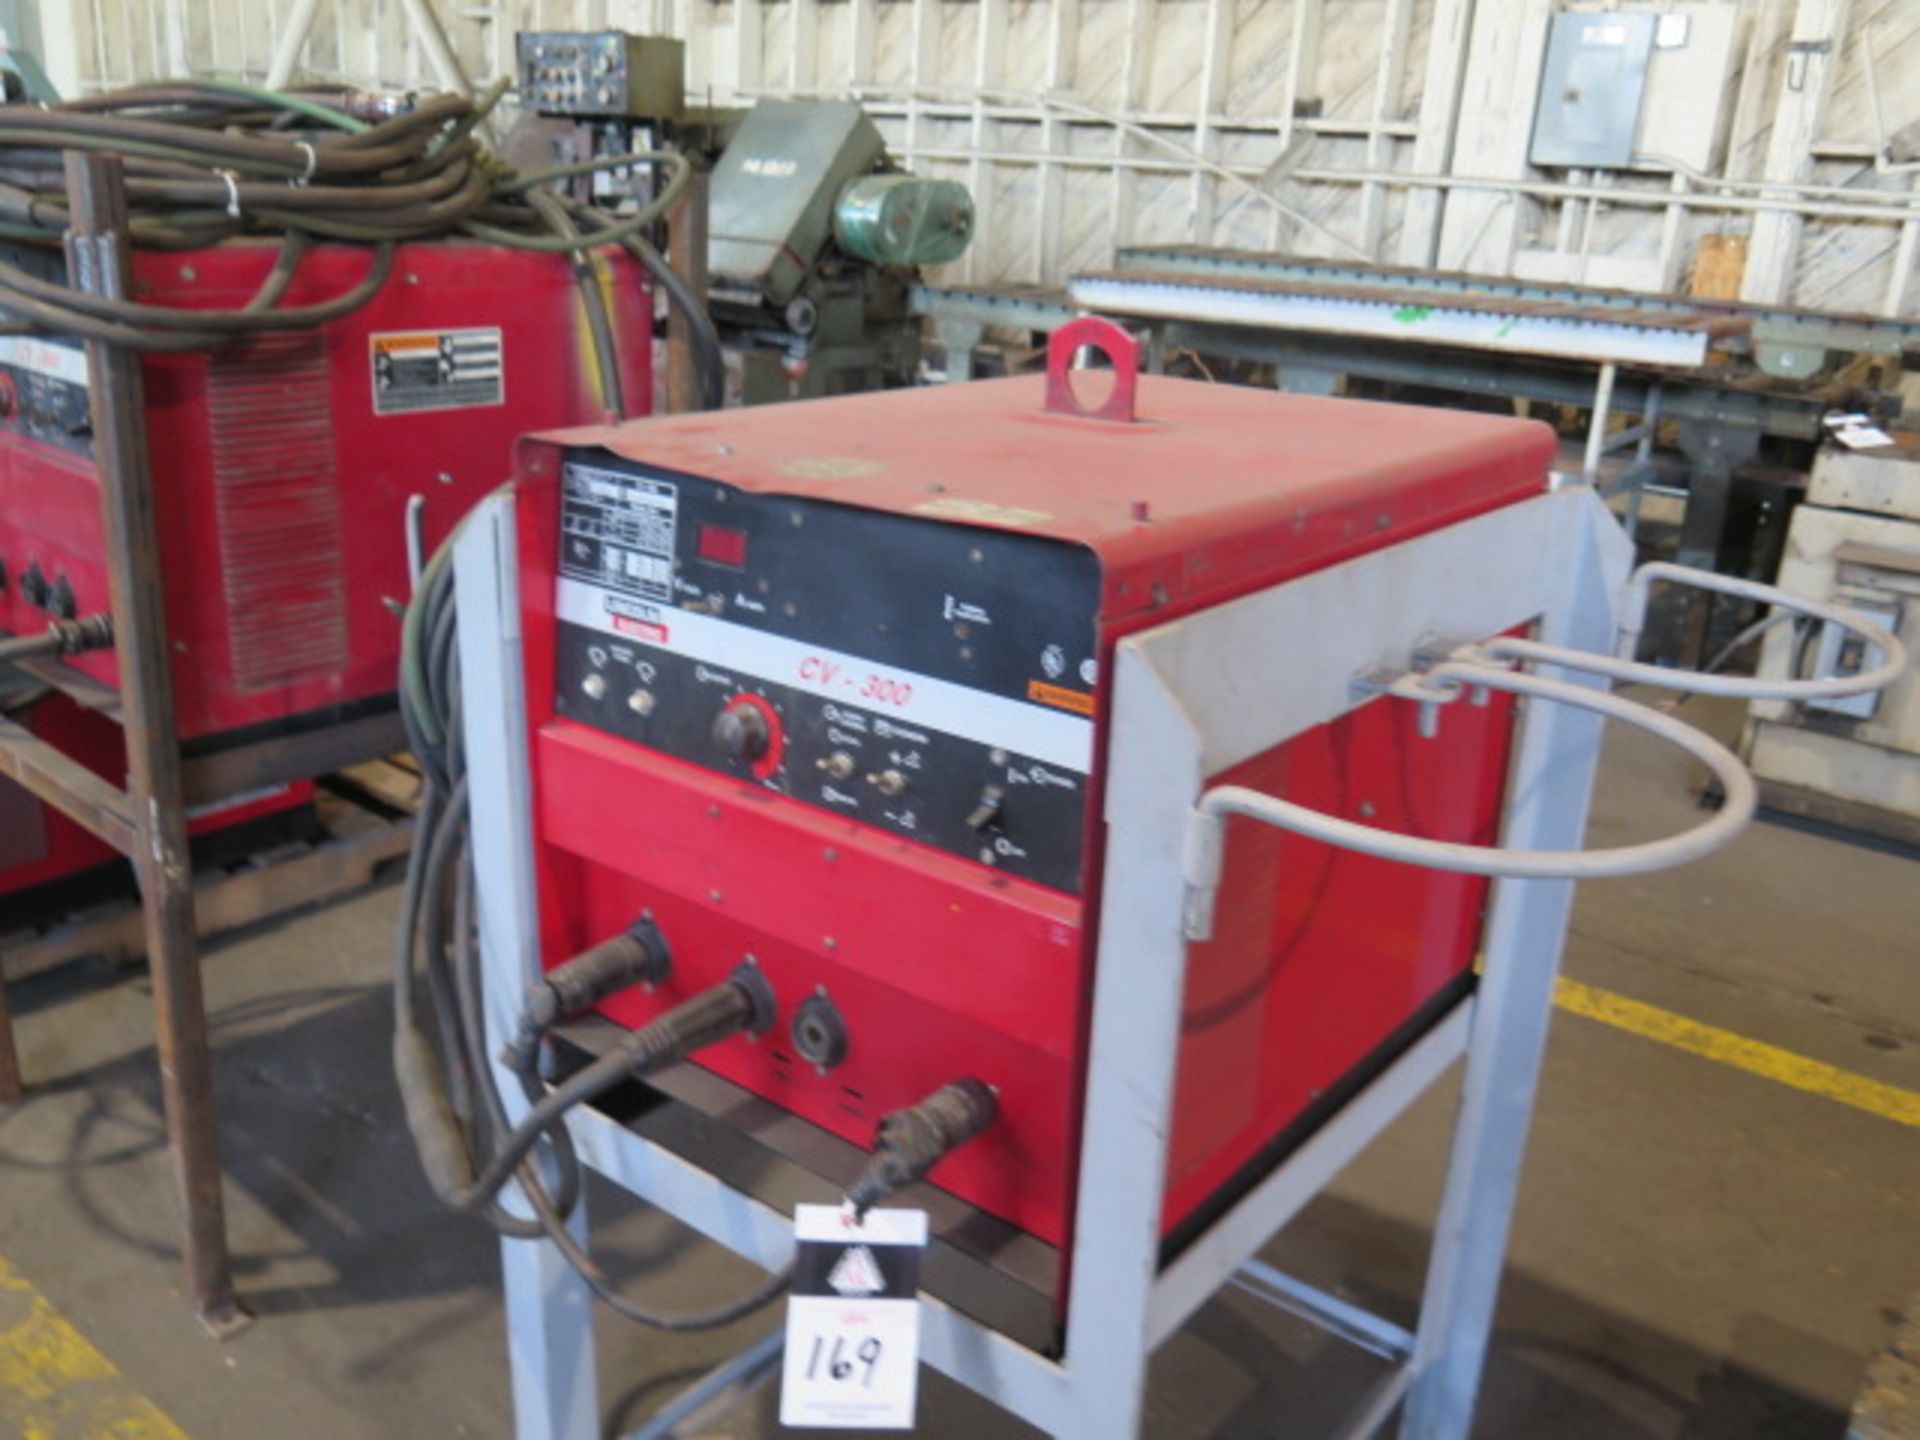 Lincoln CV-300 Arc Welding Power Source w/ Stand (SOLD AS-IS - NO WARRANTY) - Image 2 of 5